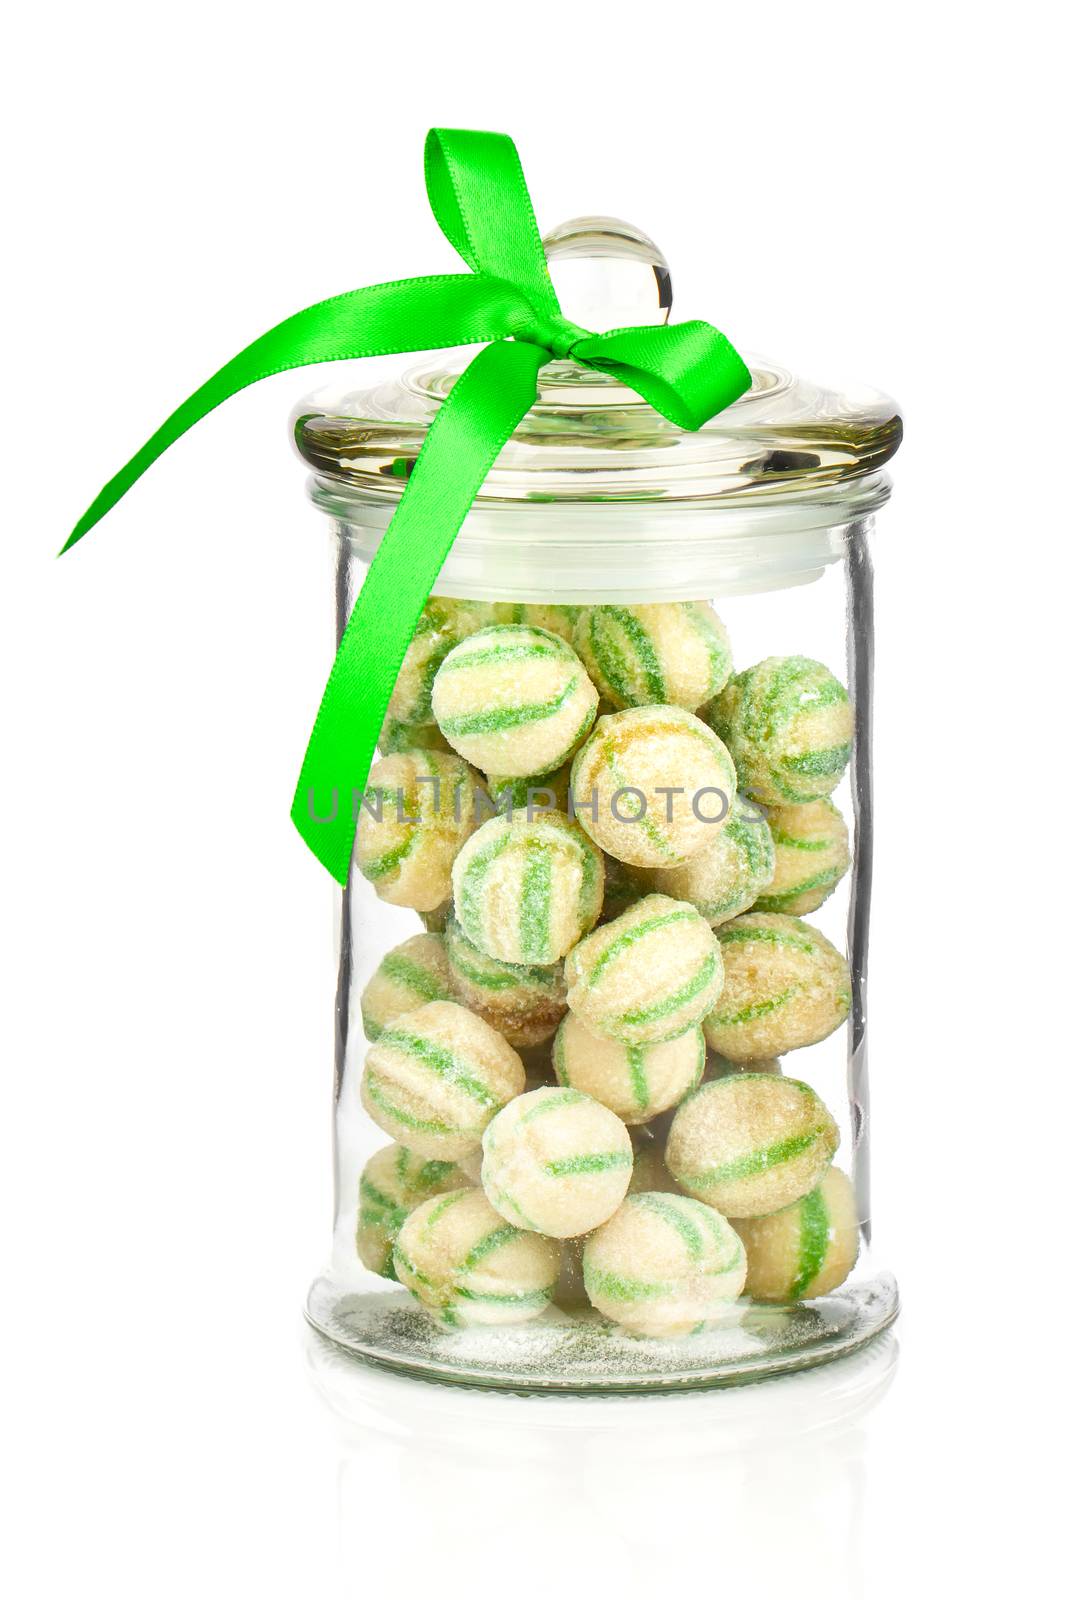 Photograph of a beautiful jar full of colorful candies, on a white background